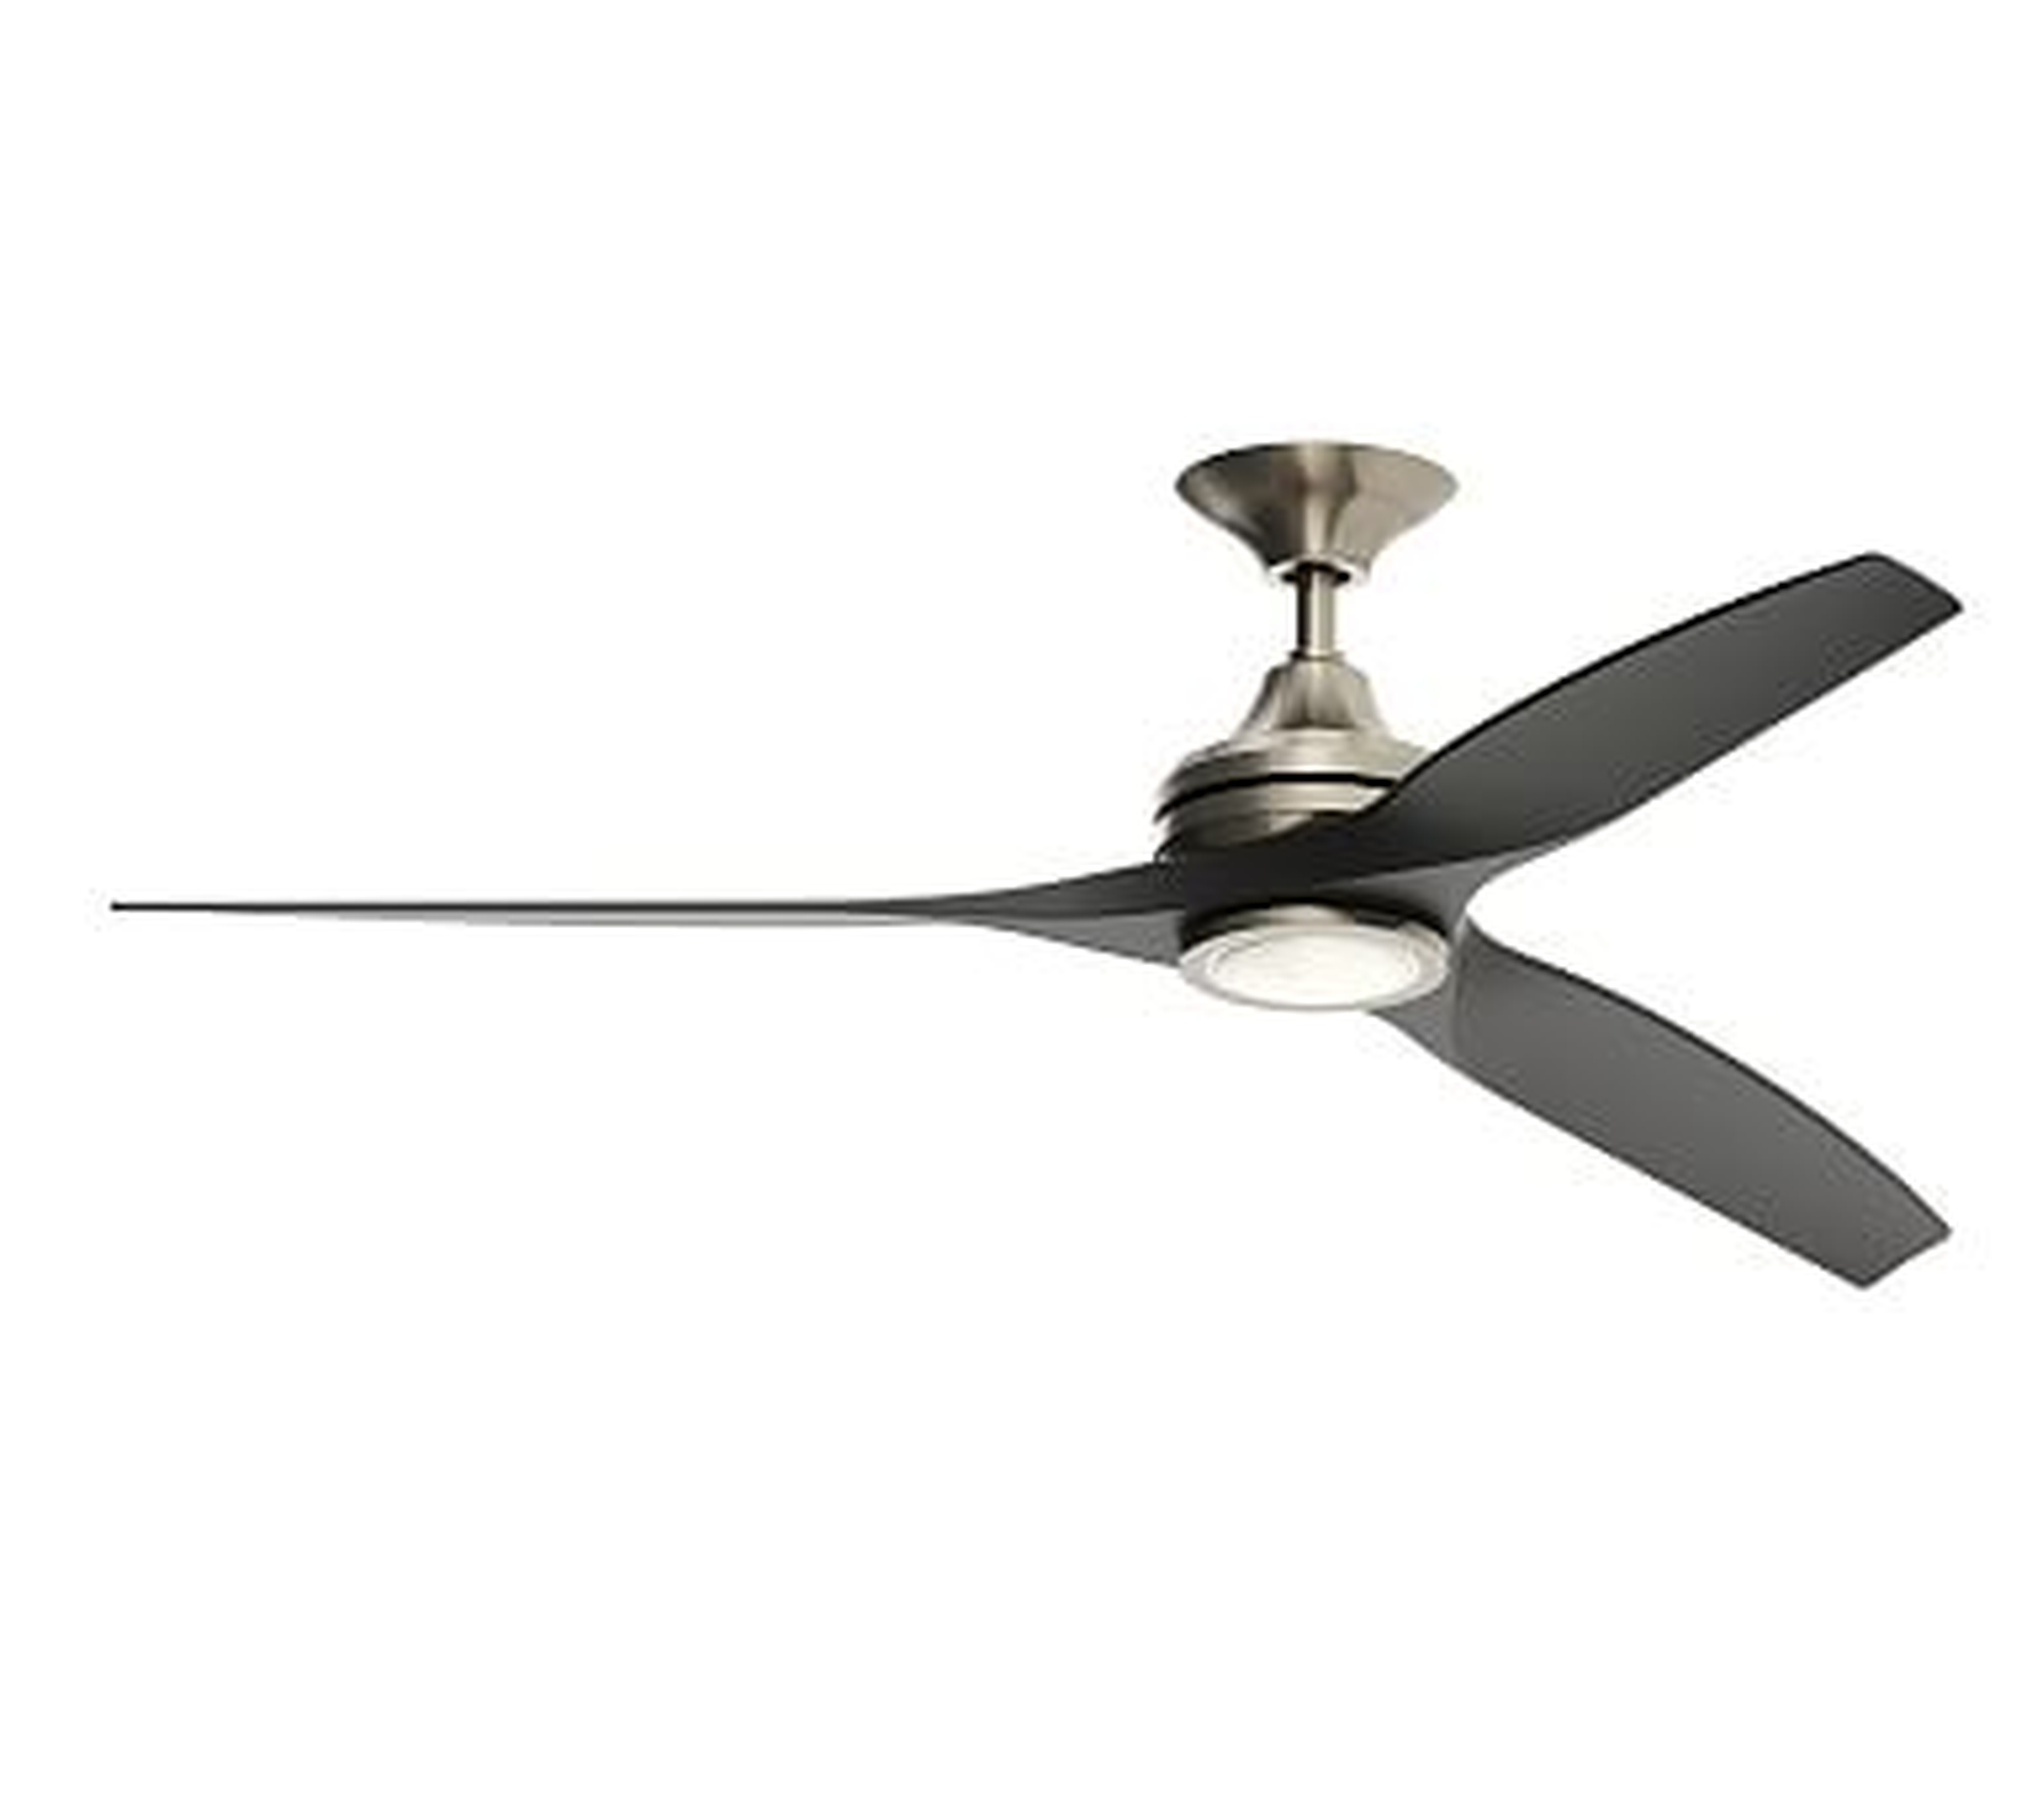 60" Spitfire Indoor/Outdoor Ceiling Fan With LED Kit, Brushed Nickel Motor With Black Blades - Pottery Barn